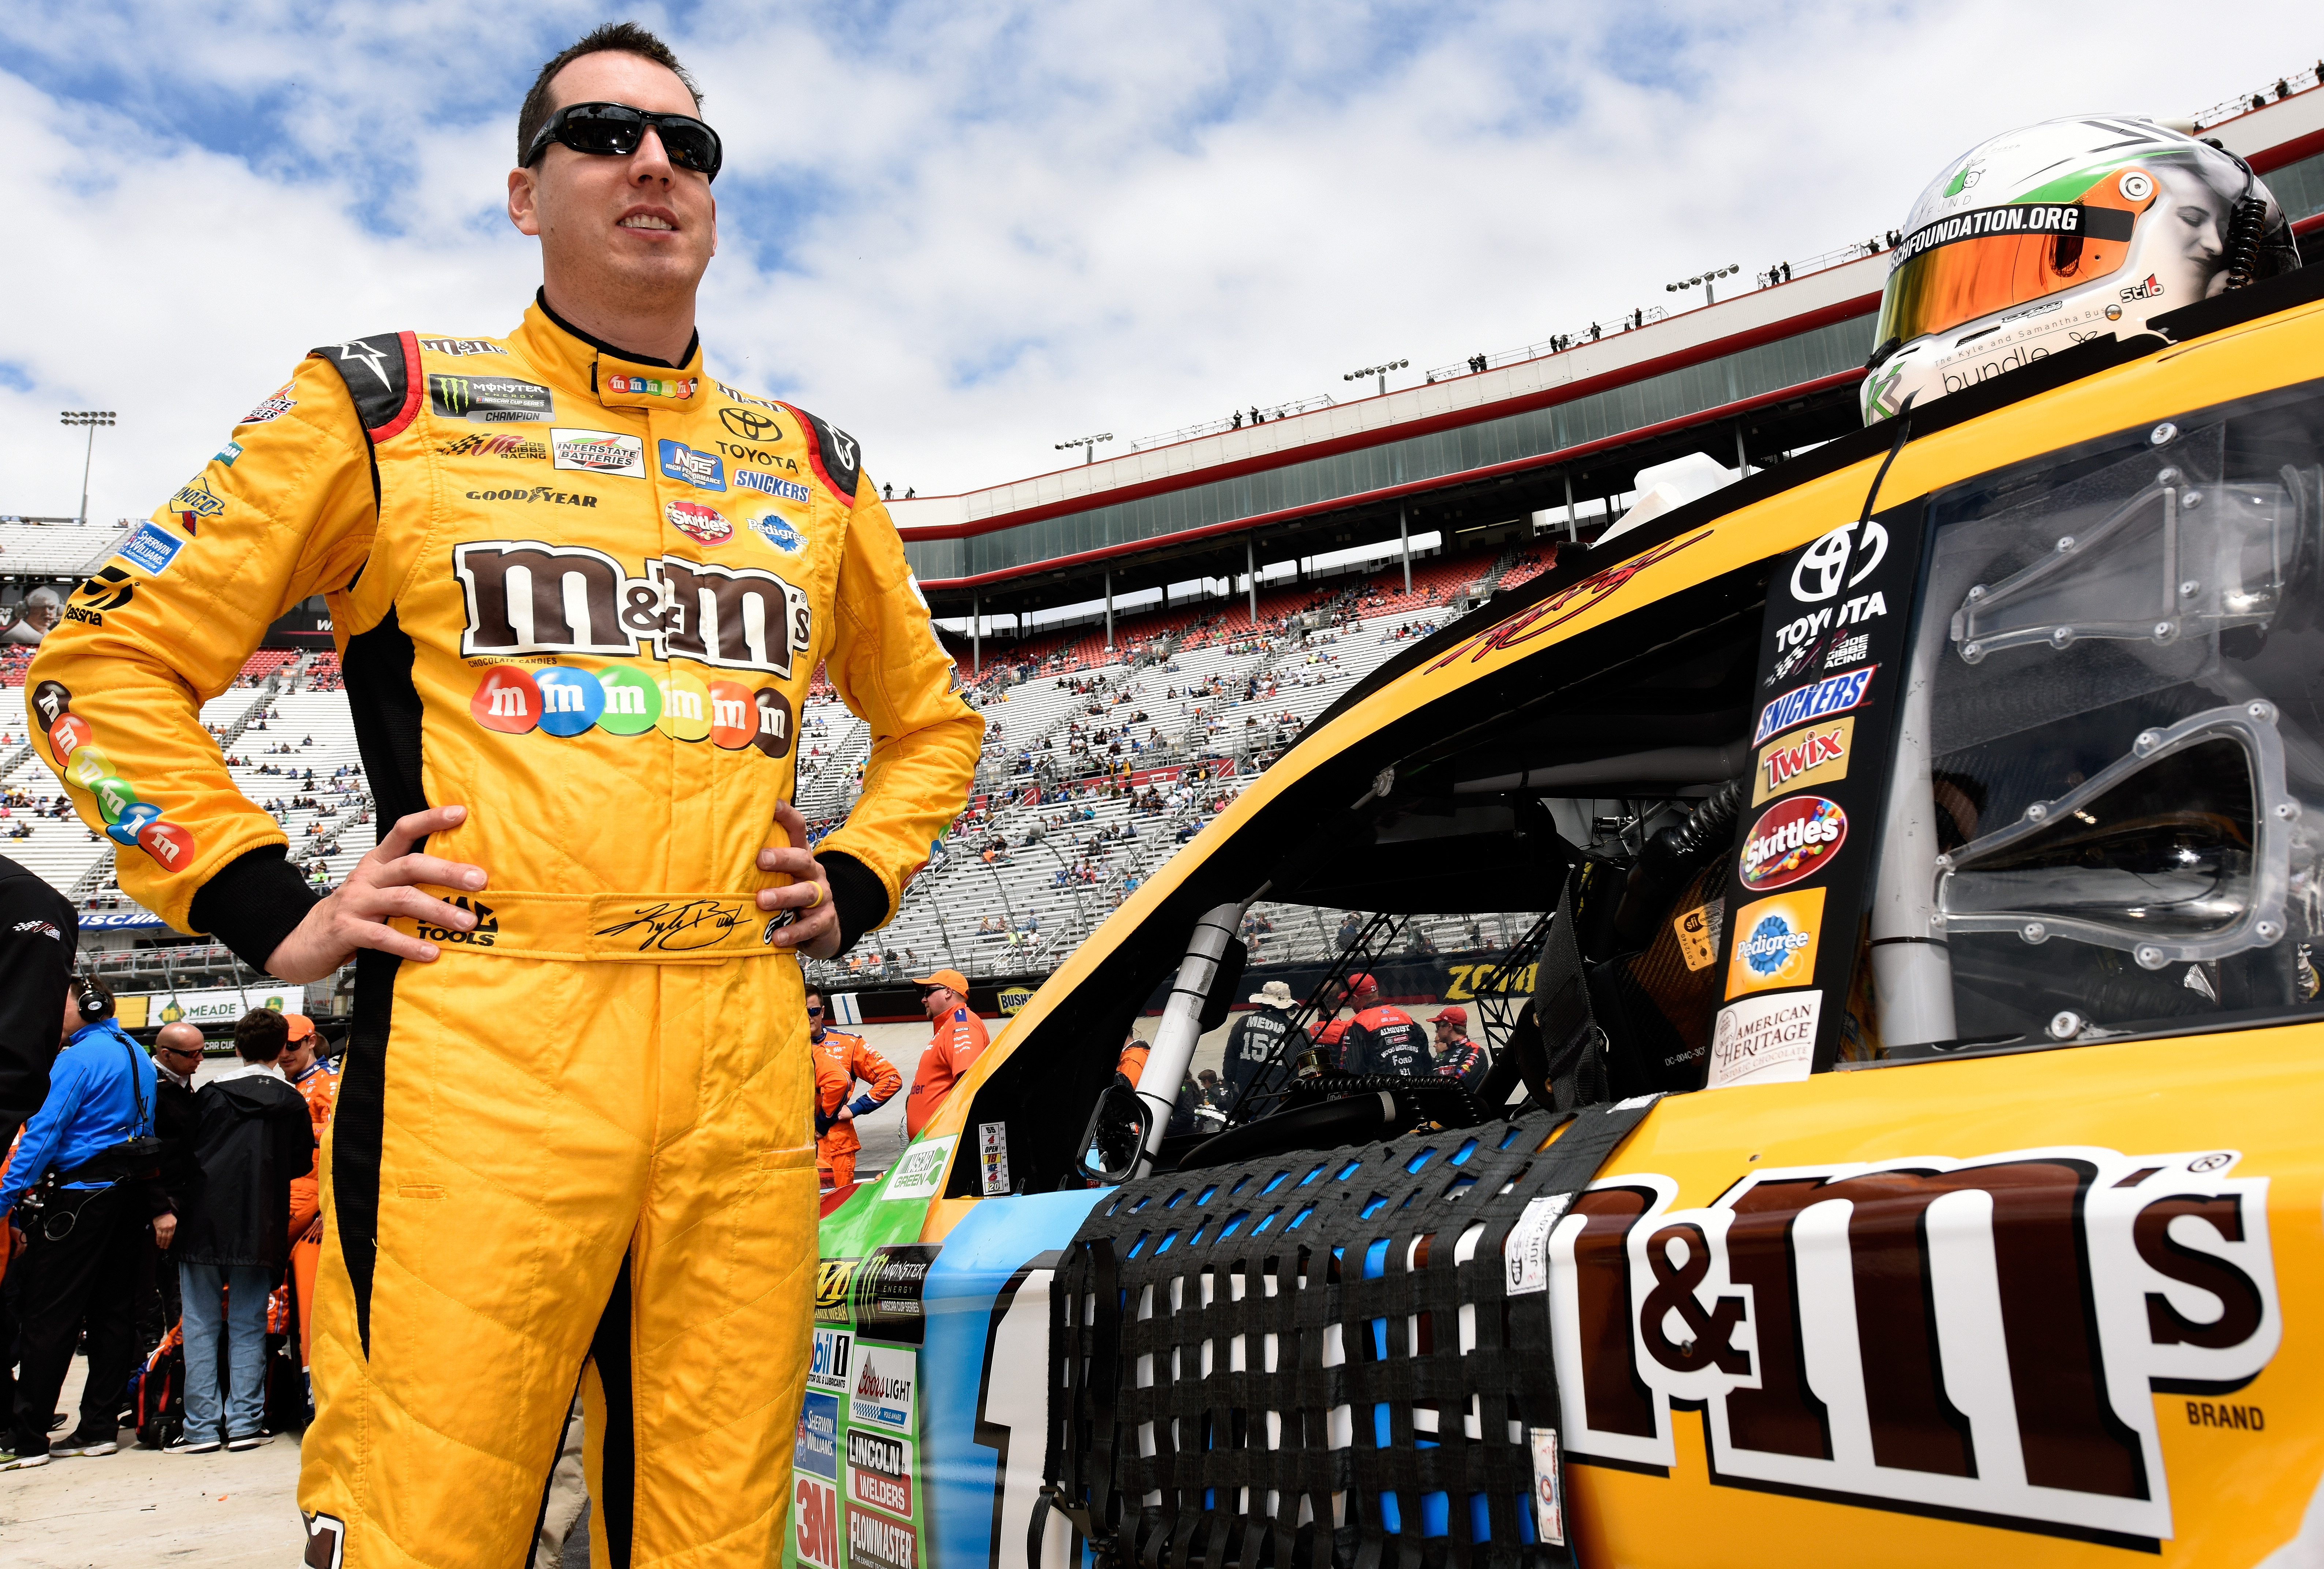 NASCAR Star Kyle Busch Has Donated Nearly $1 Million to His Passion Project